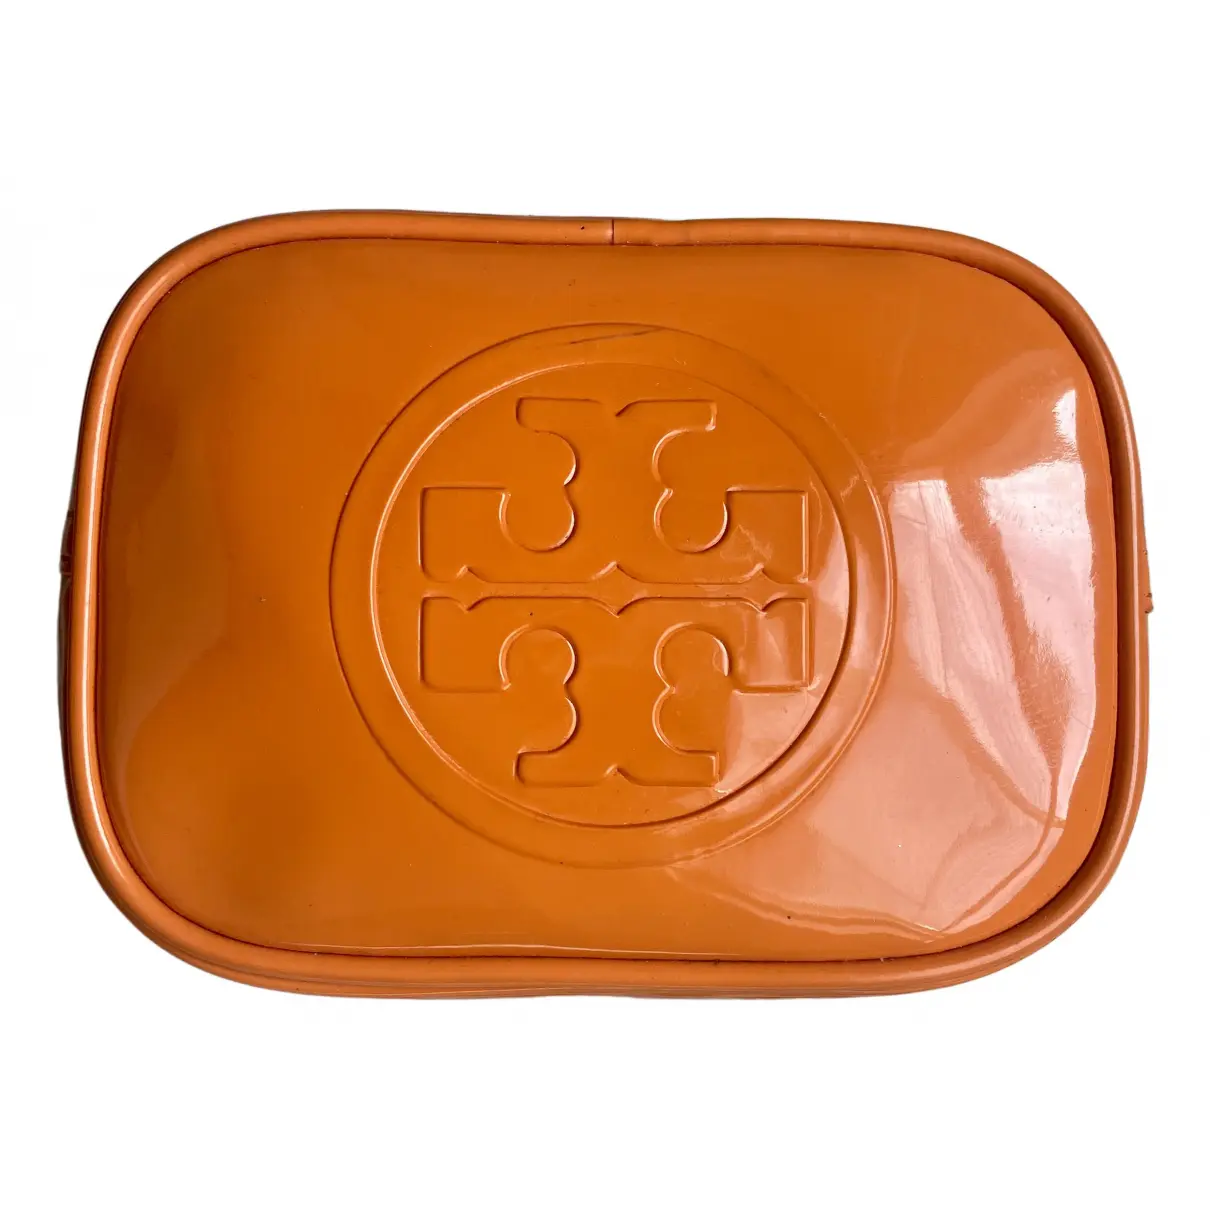 Patent leather purse Tory Burch